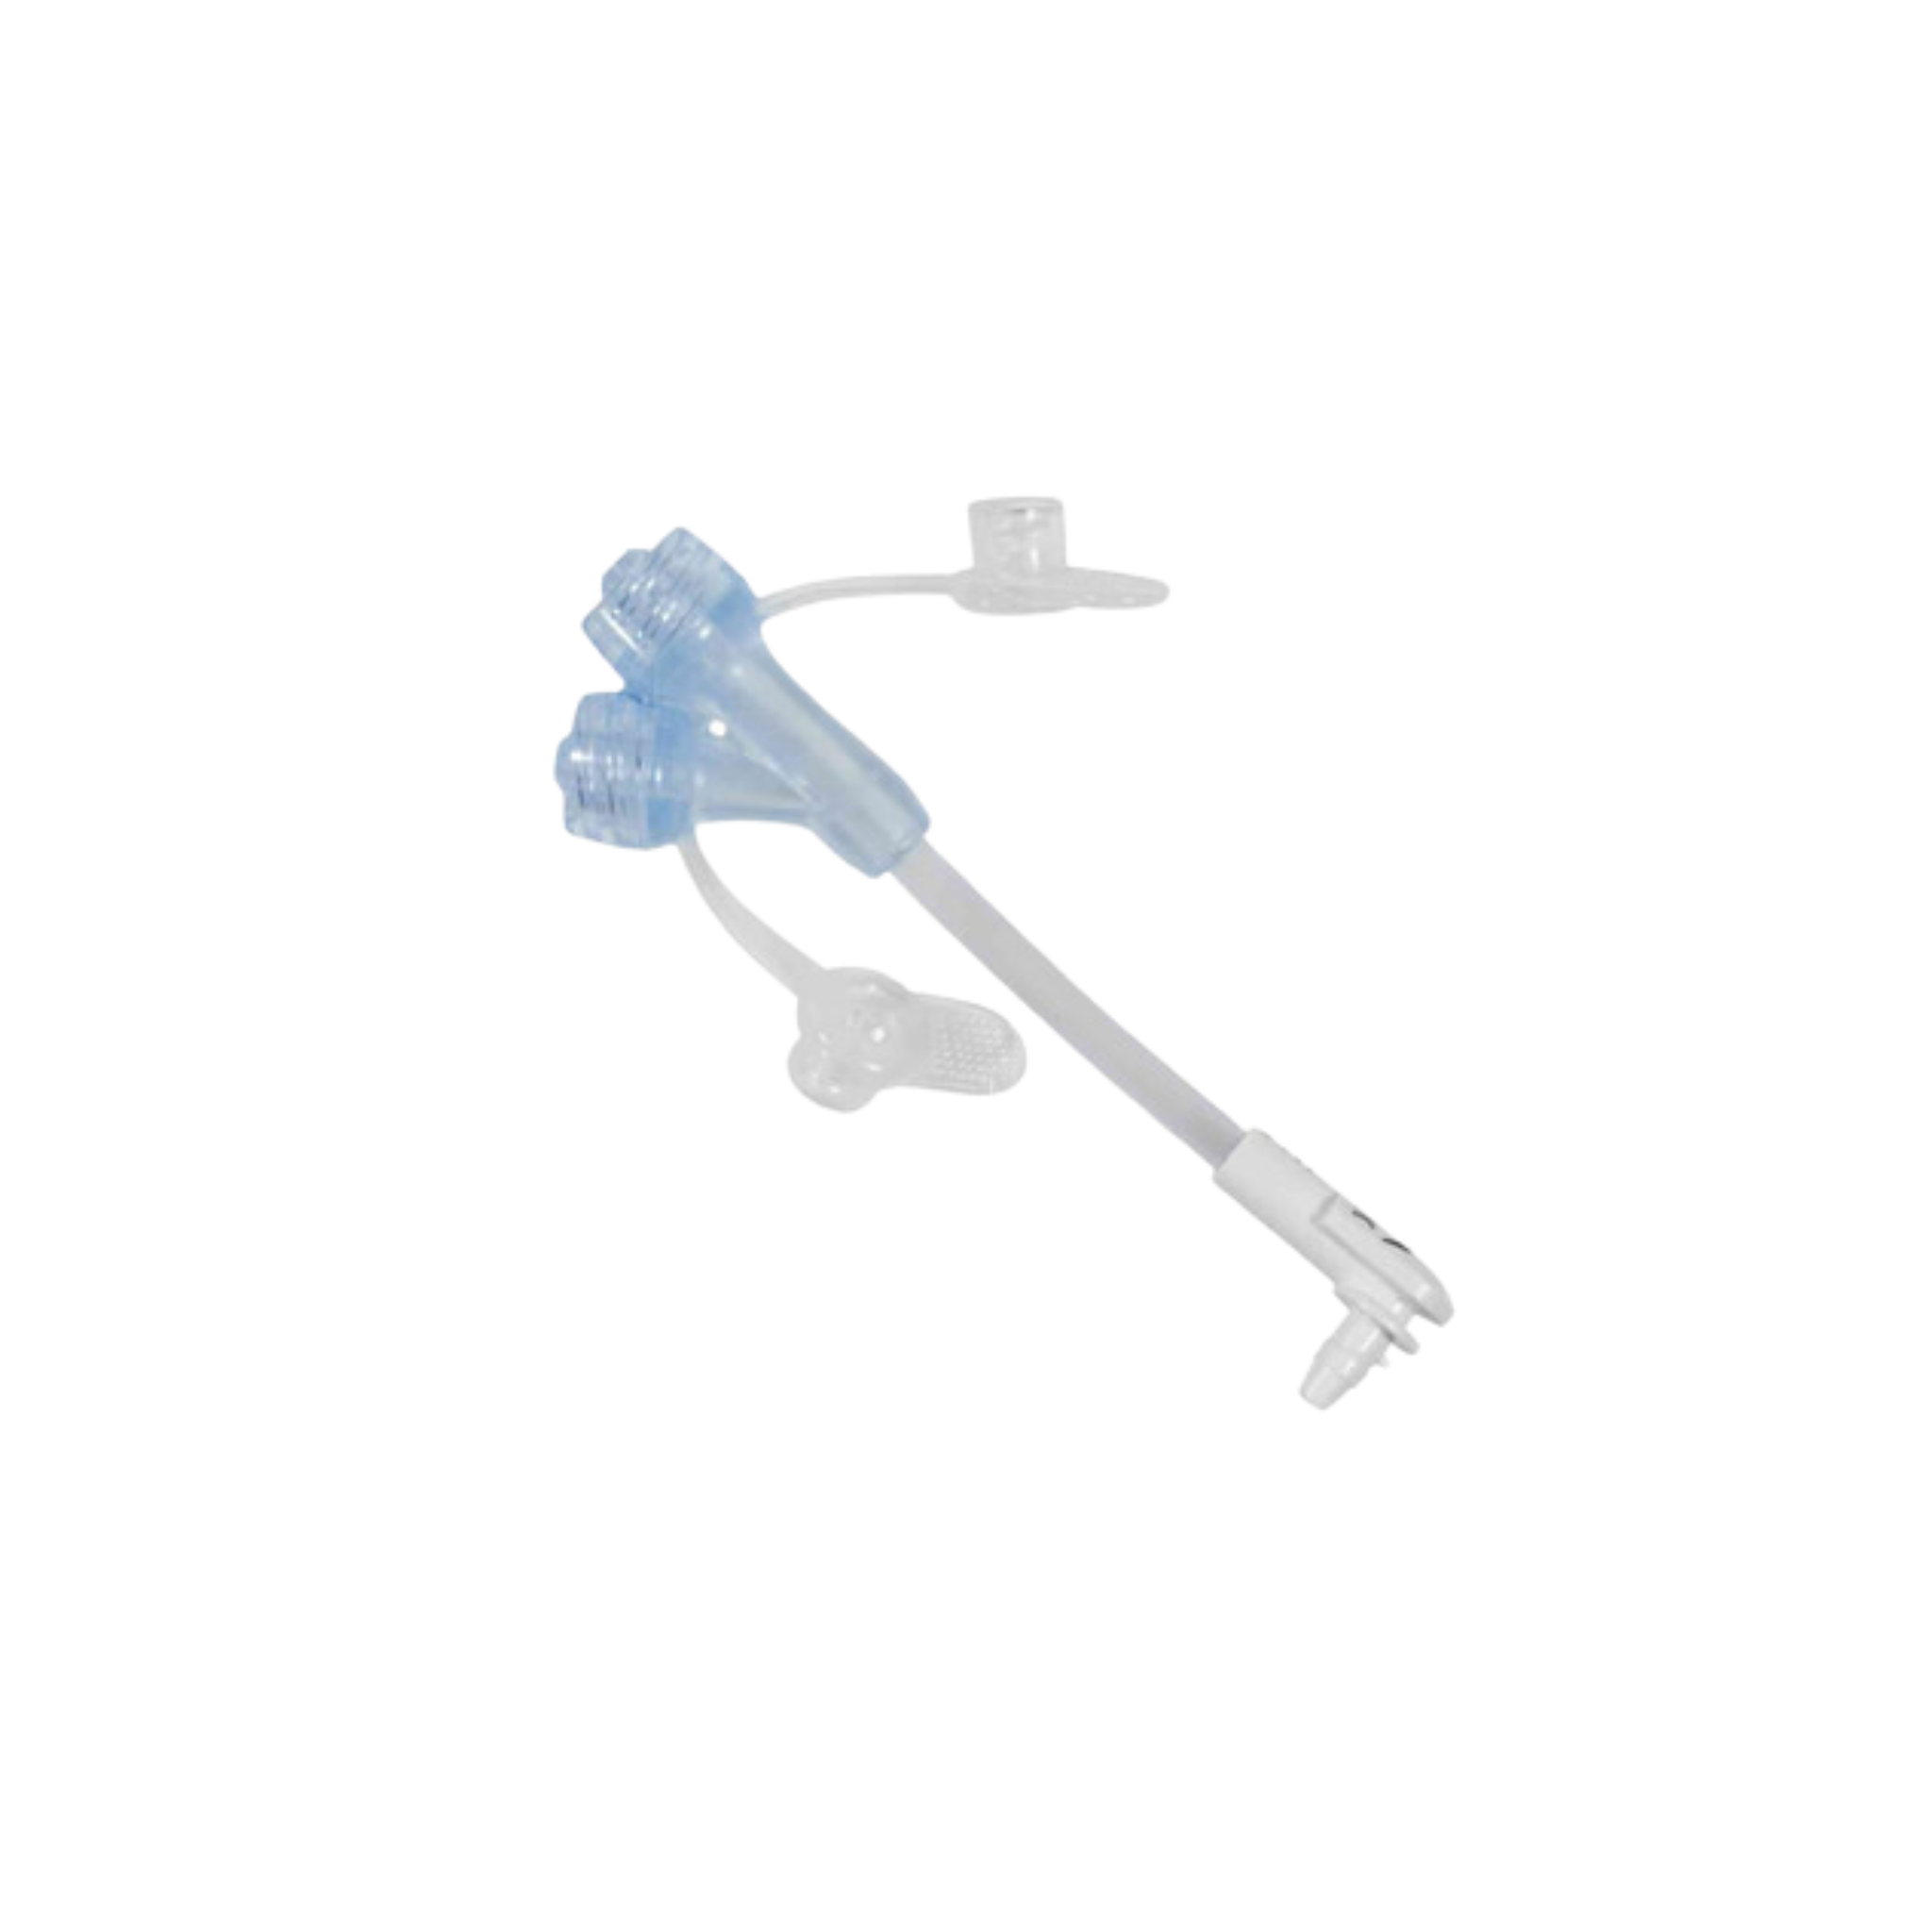 MIC-KEY* Medication Set with SECURE-LOK* Right-Angle Connector and 2 x  "Y" ports